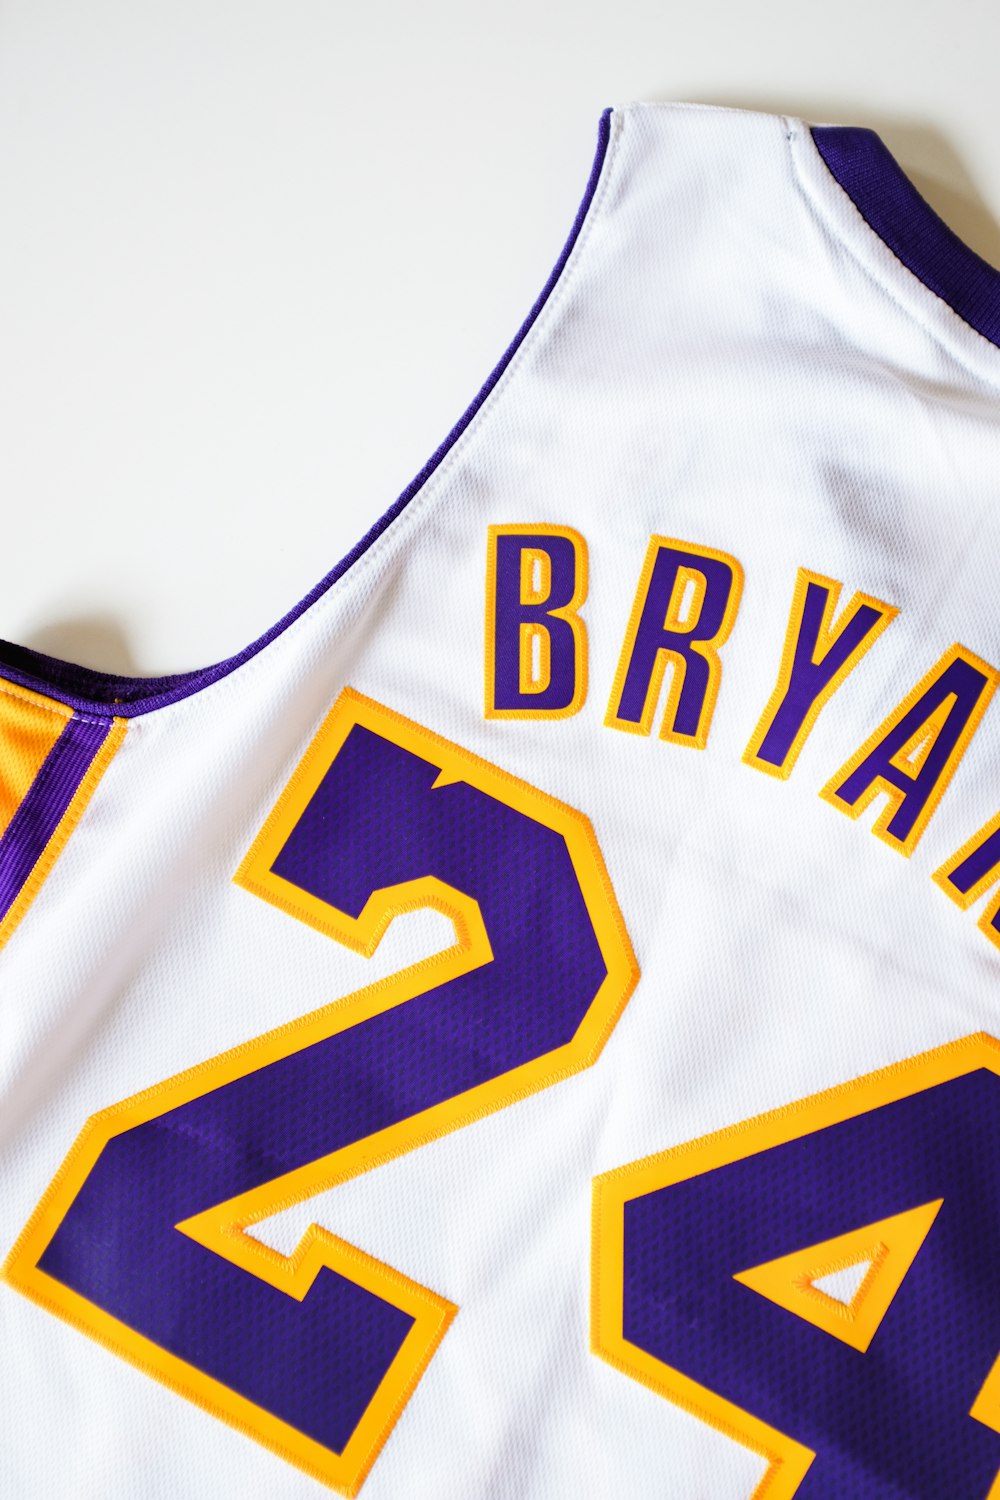 500 Kobe Bryant Pictures Hd Download Free Images On Unsplash